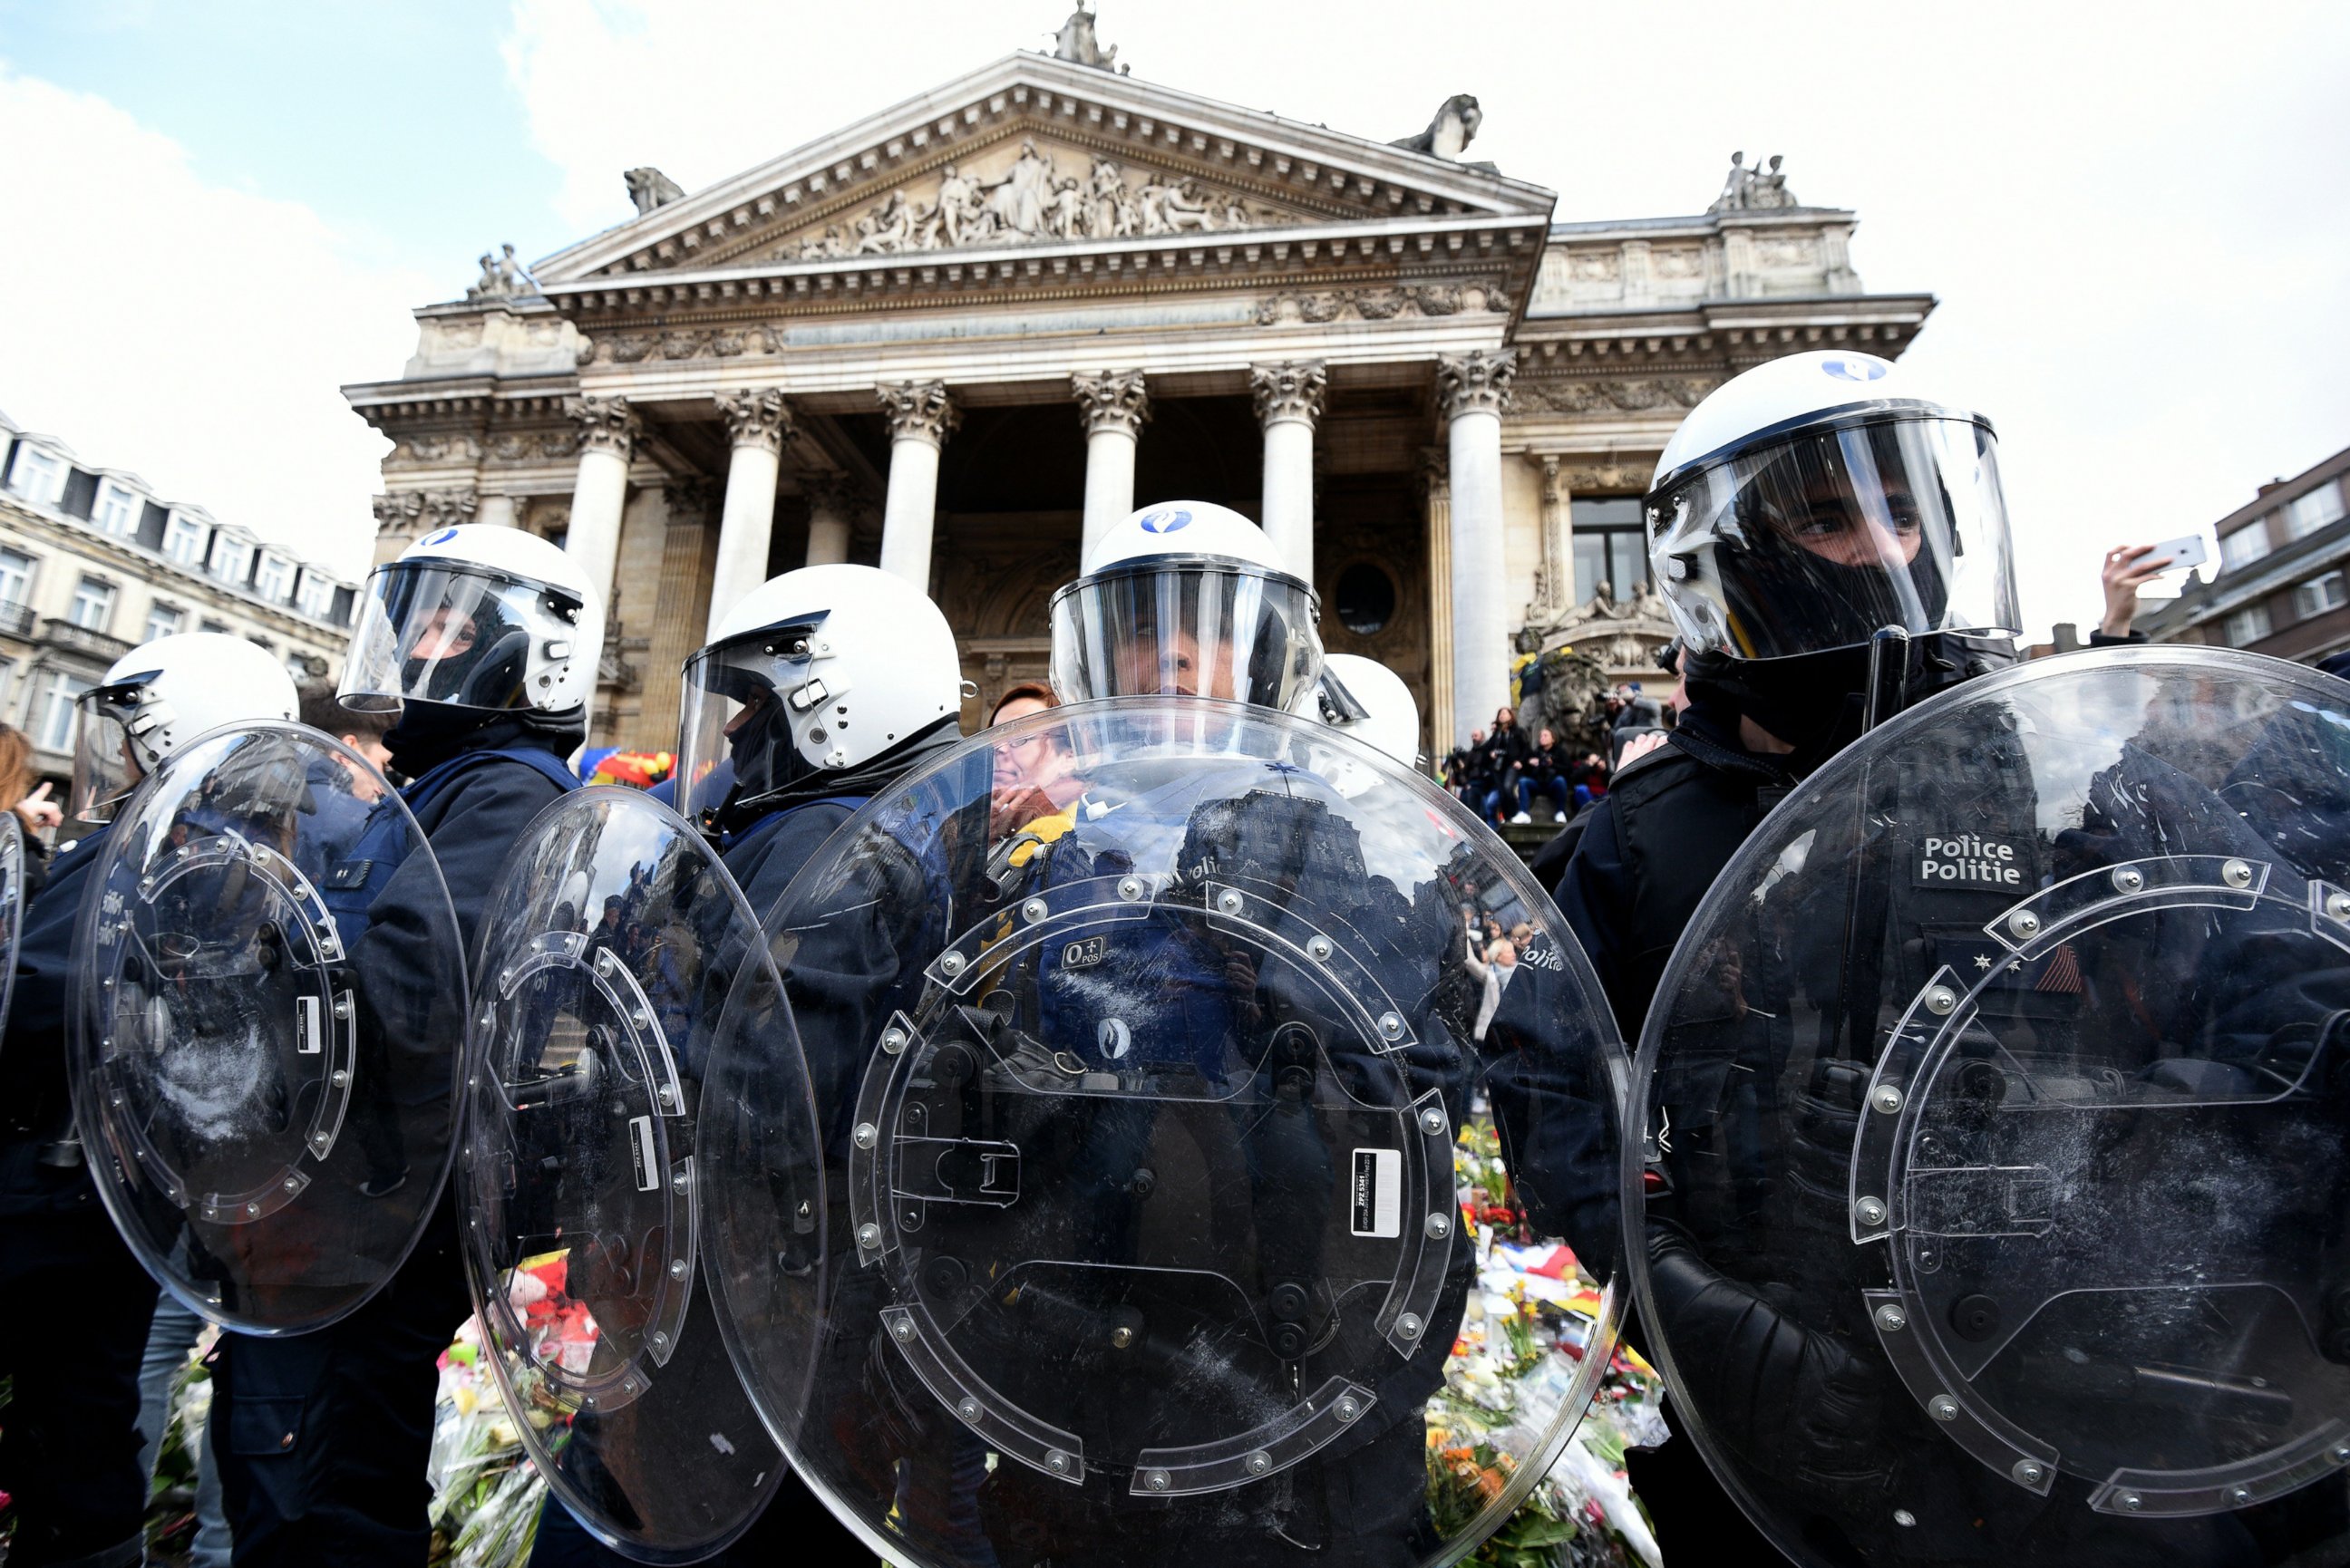 PHOTO: Riot police stand guard as far-right football hooligans disturb the peaceful rally outside the stock exchange, Place de la Bourse square in Brussels, March 27, 2016.